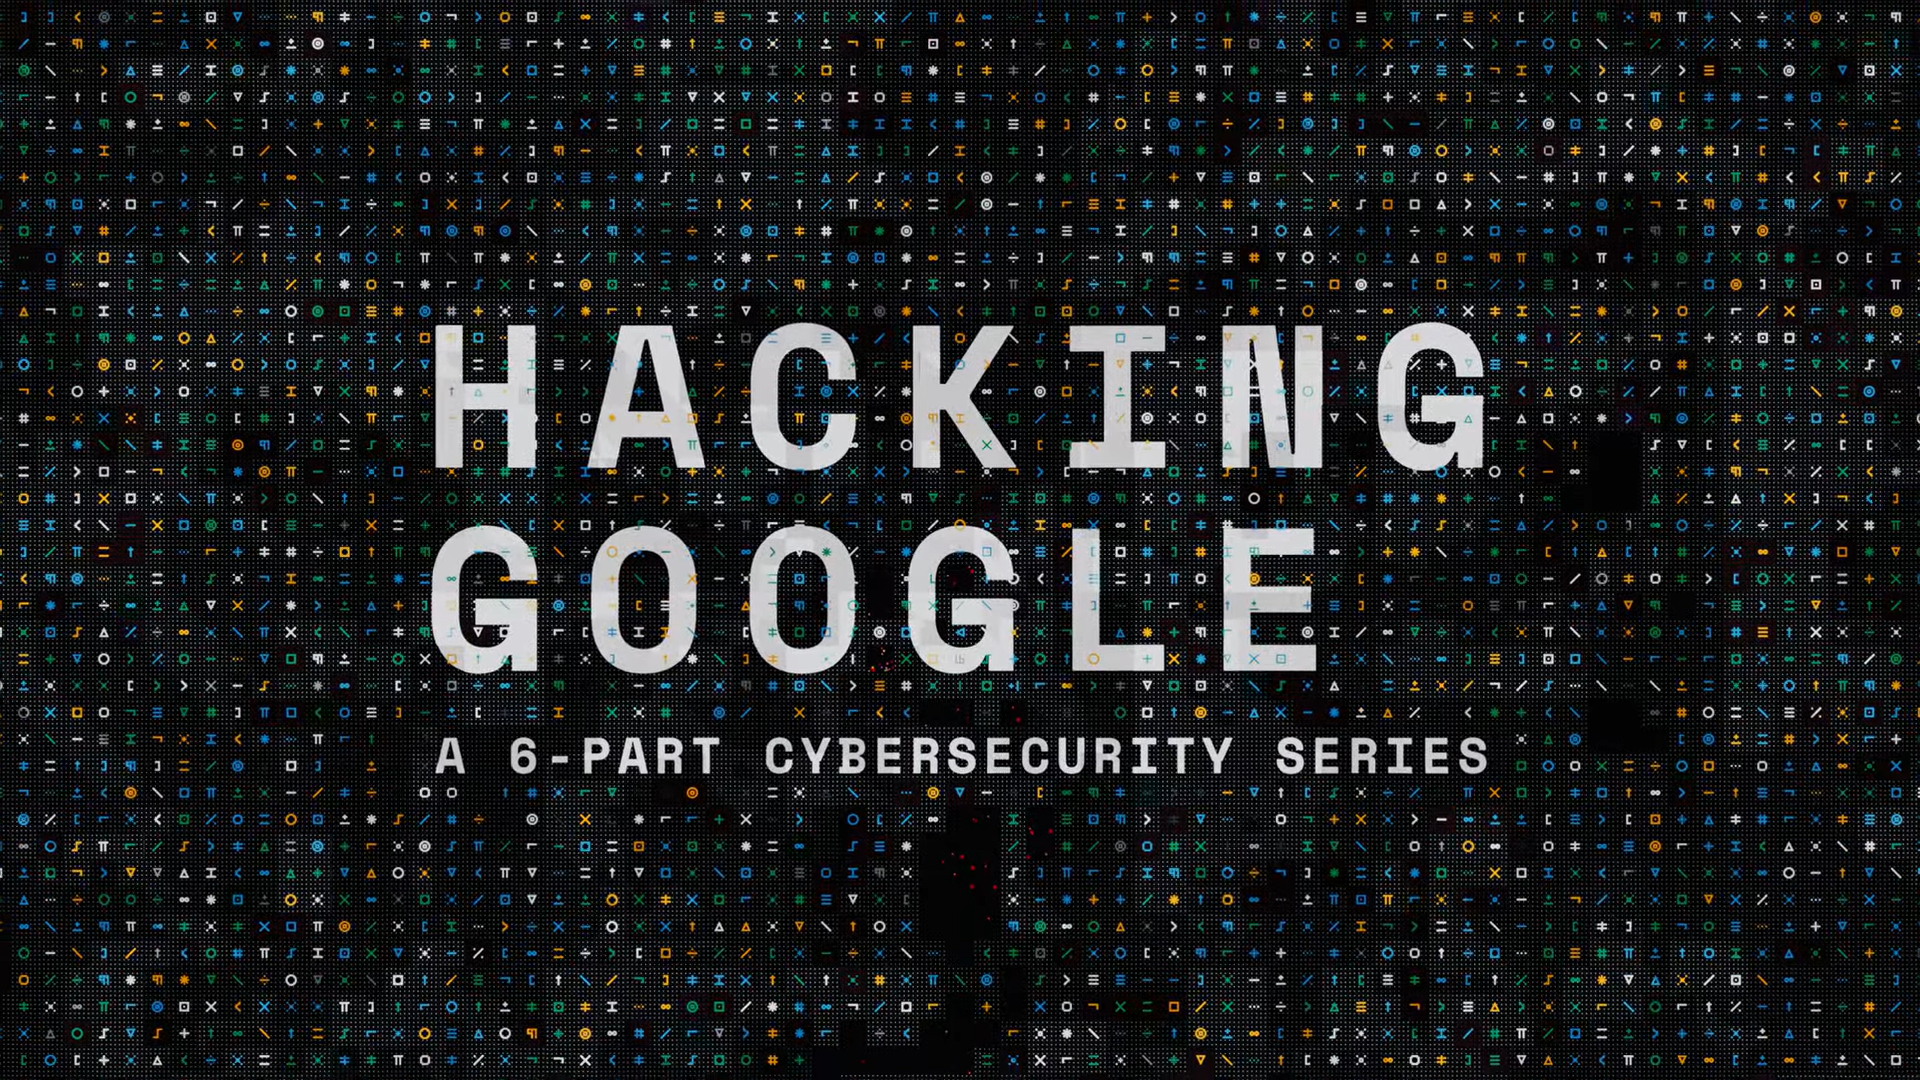 HACKING GOOGLE: a docuseries on how Google’s security teams work